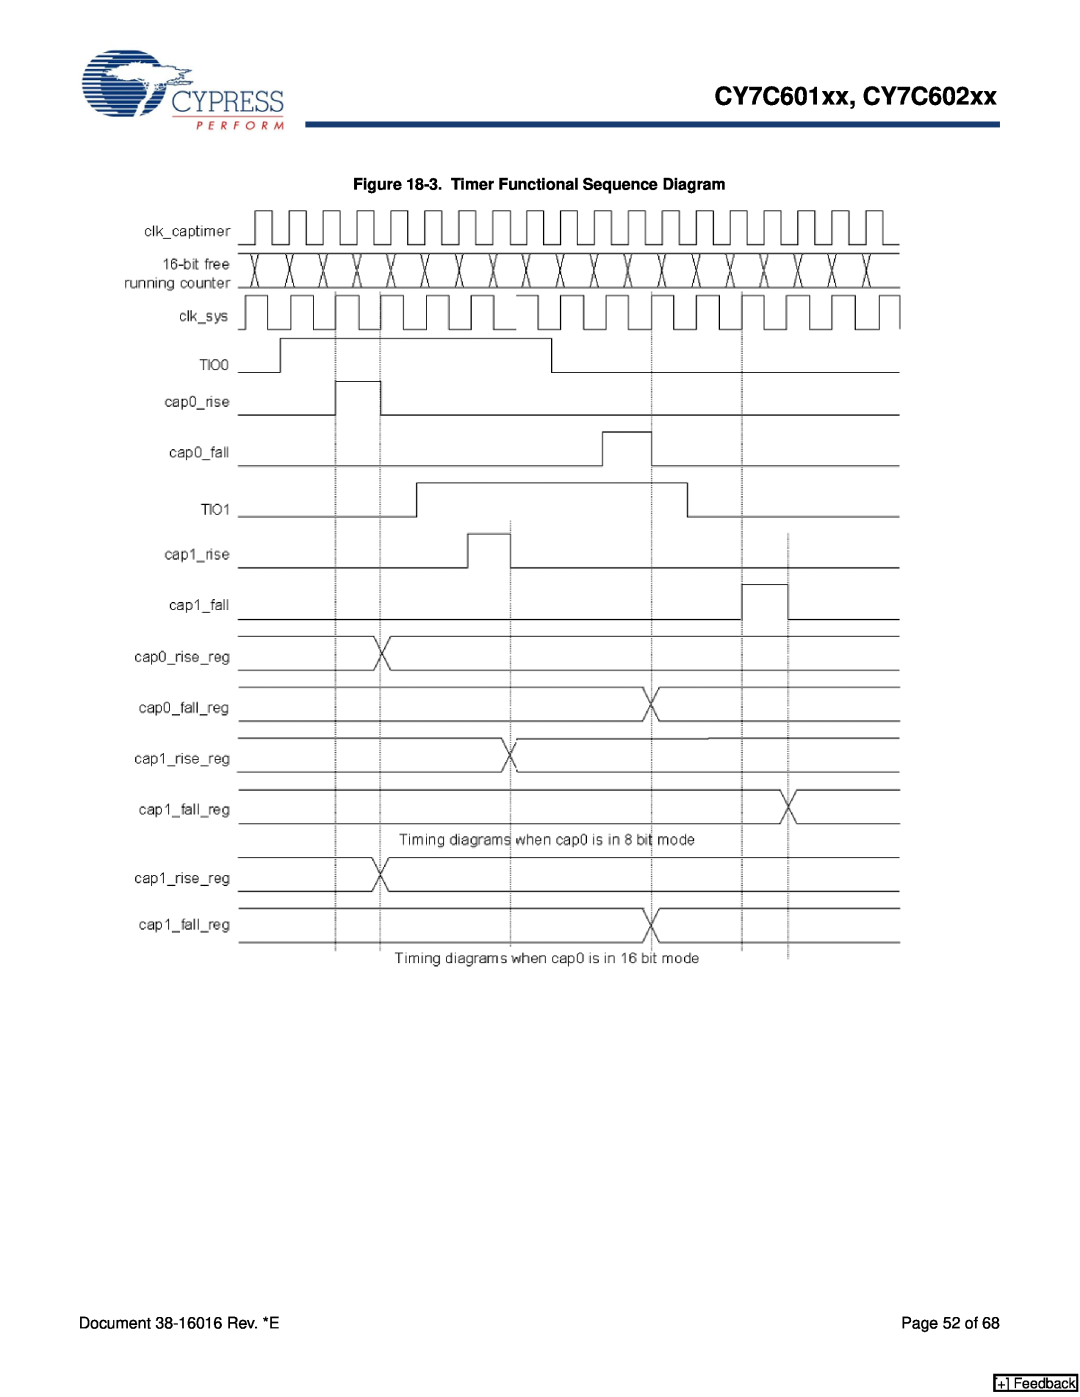 Cypress manual 3. Timer Functional Sequence Diagram, CY7C601xx, CY7C602xx, Page 52 of, + Feedback 